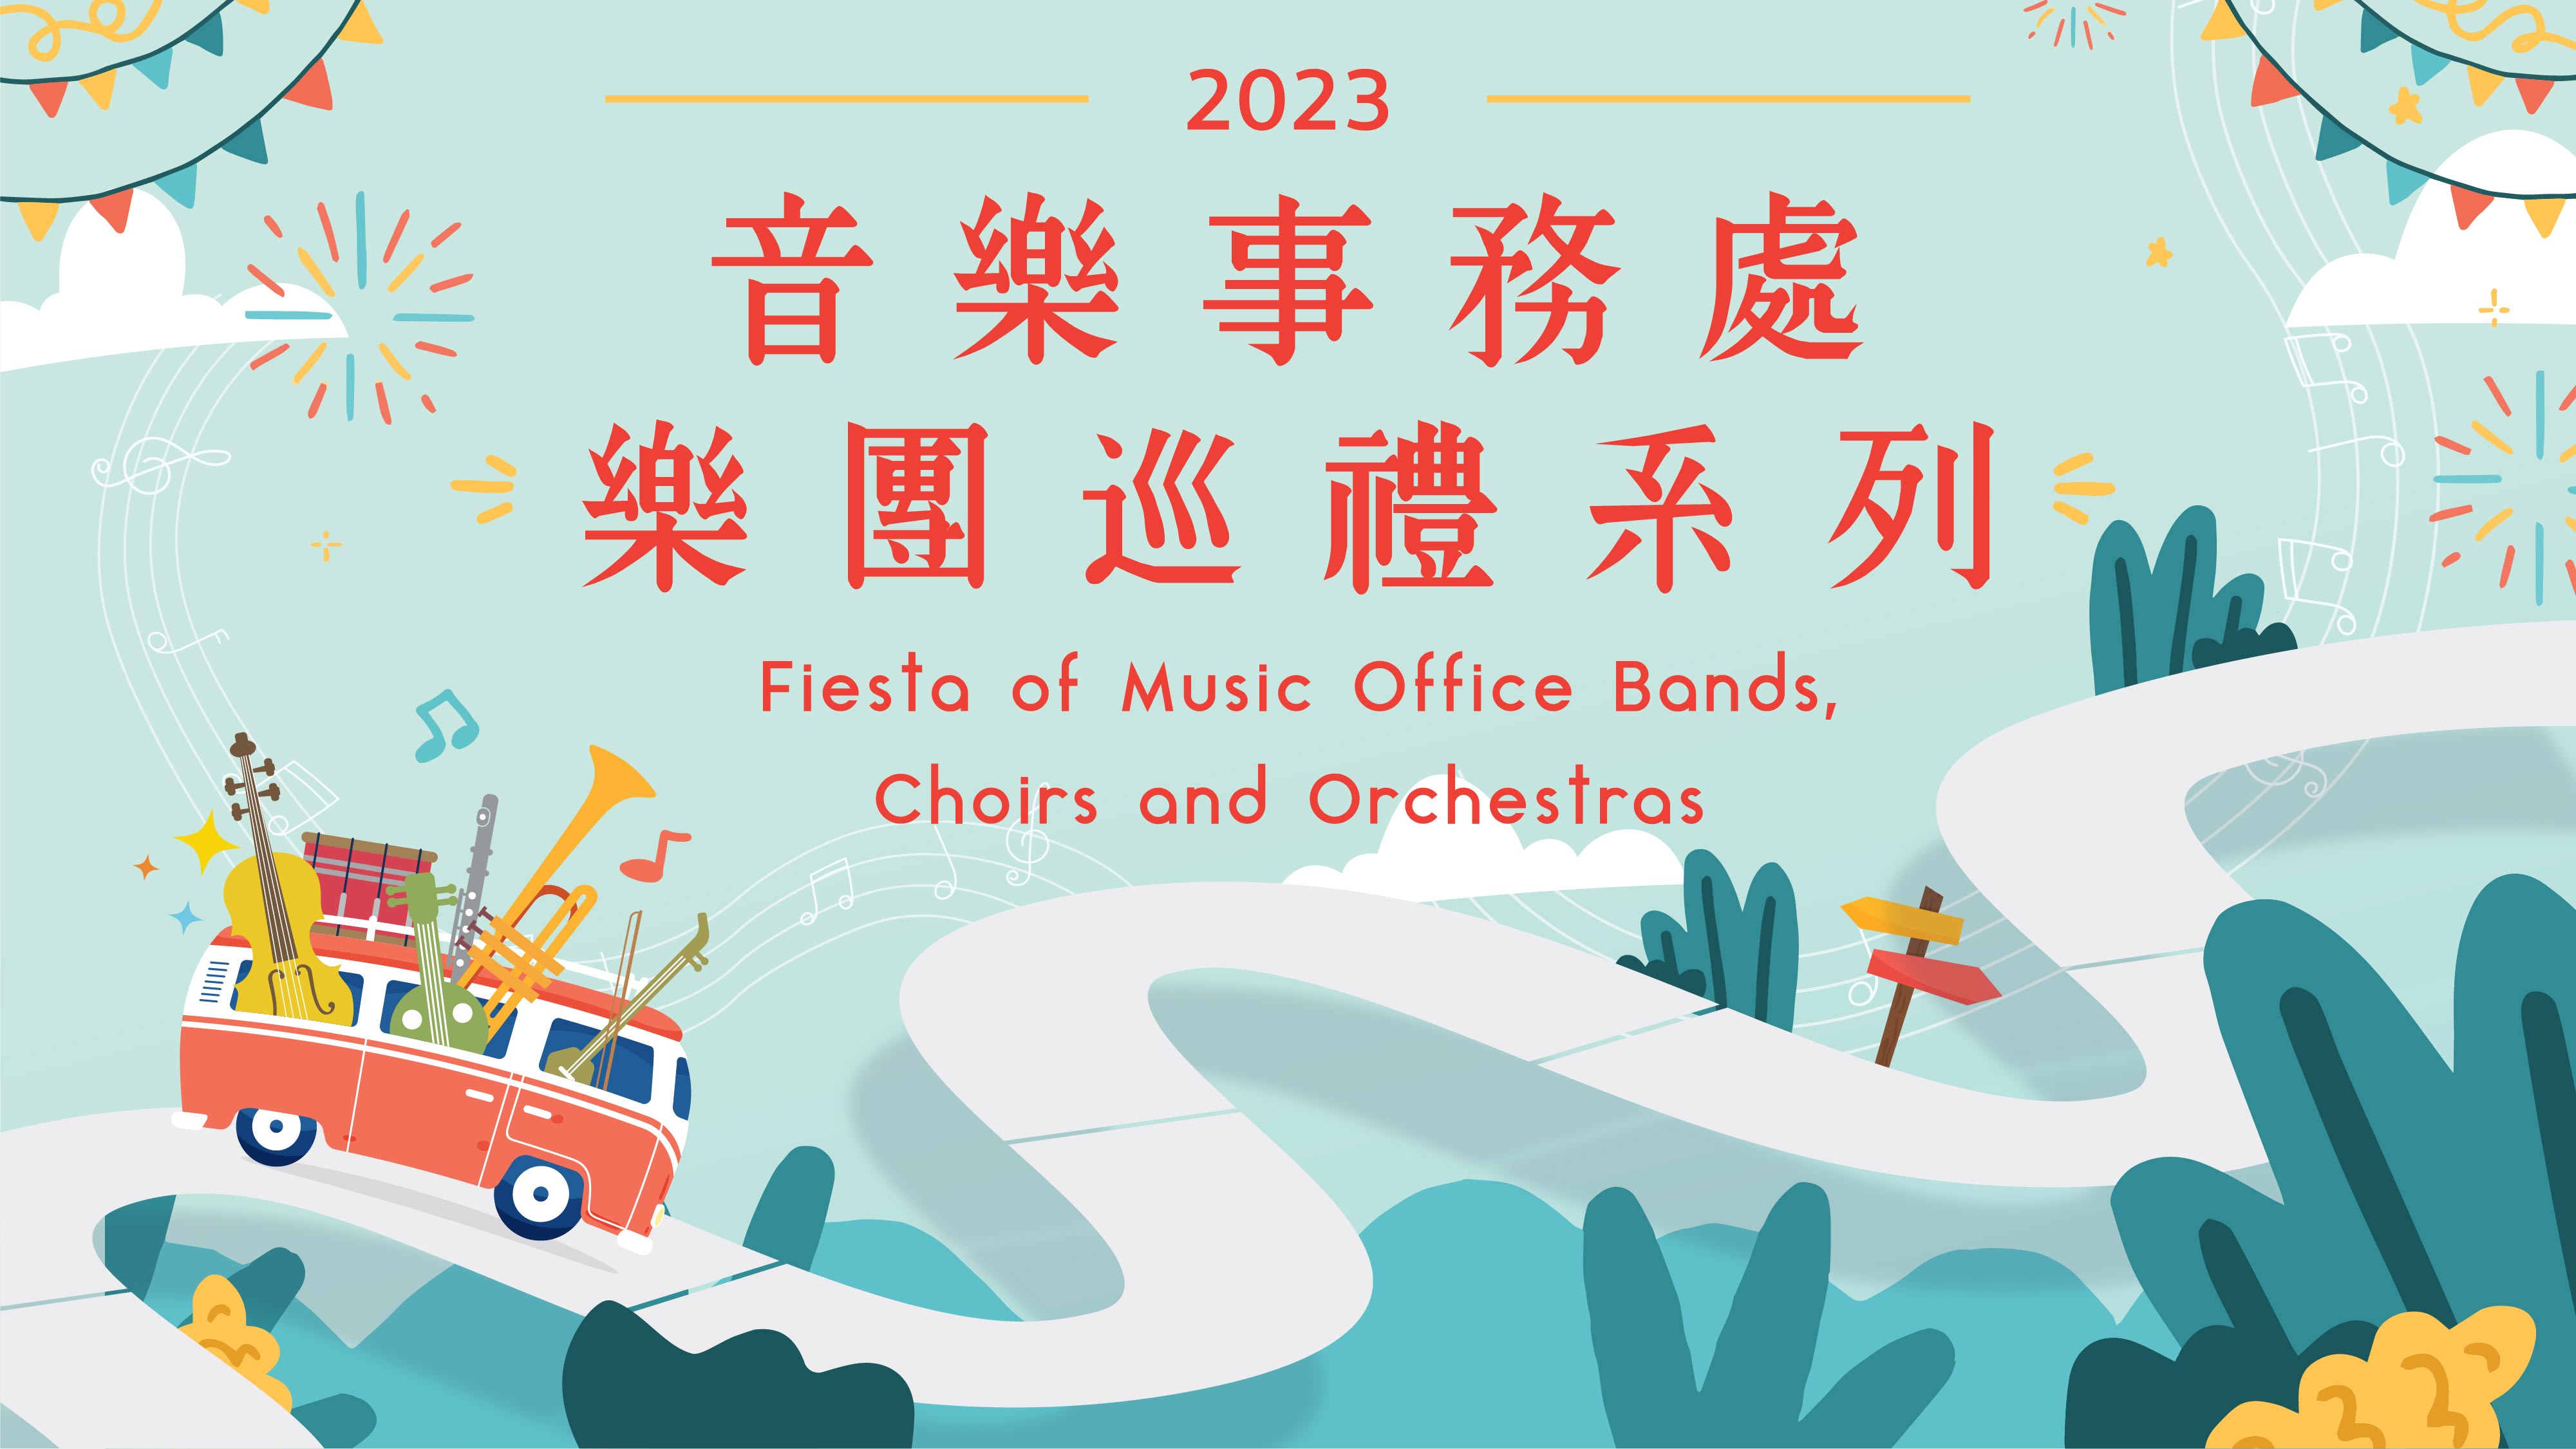 2023 Fiesta of Music Office Bands, Choirs and Orchestras (Completed)